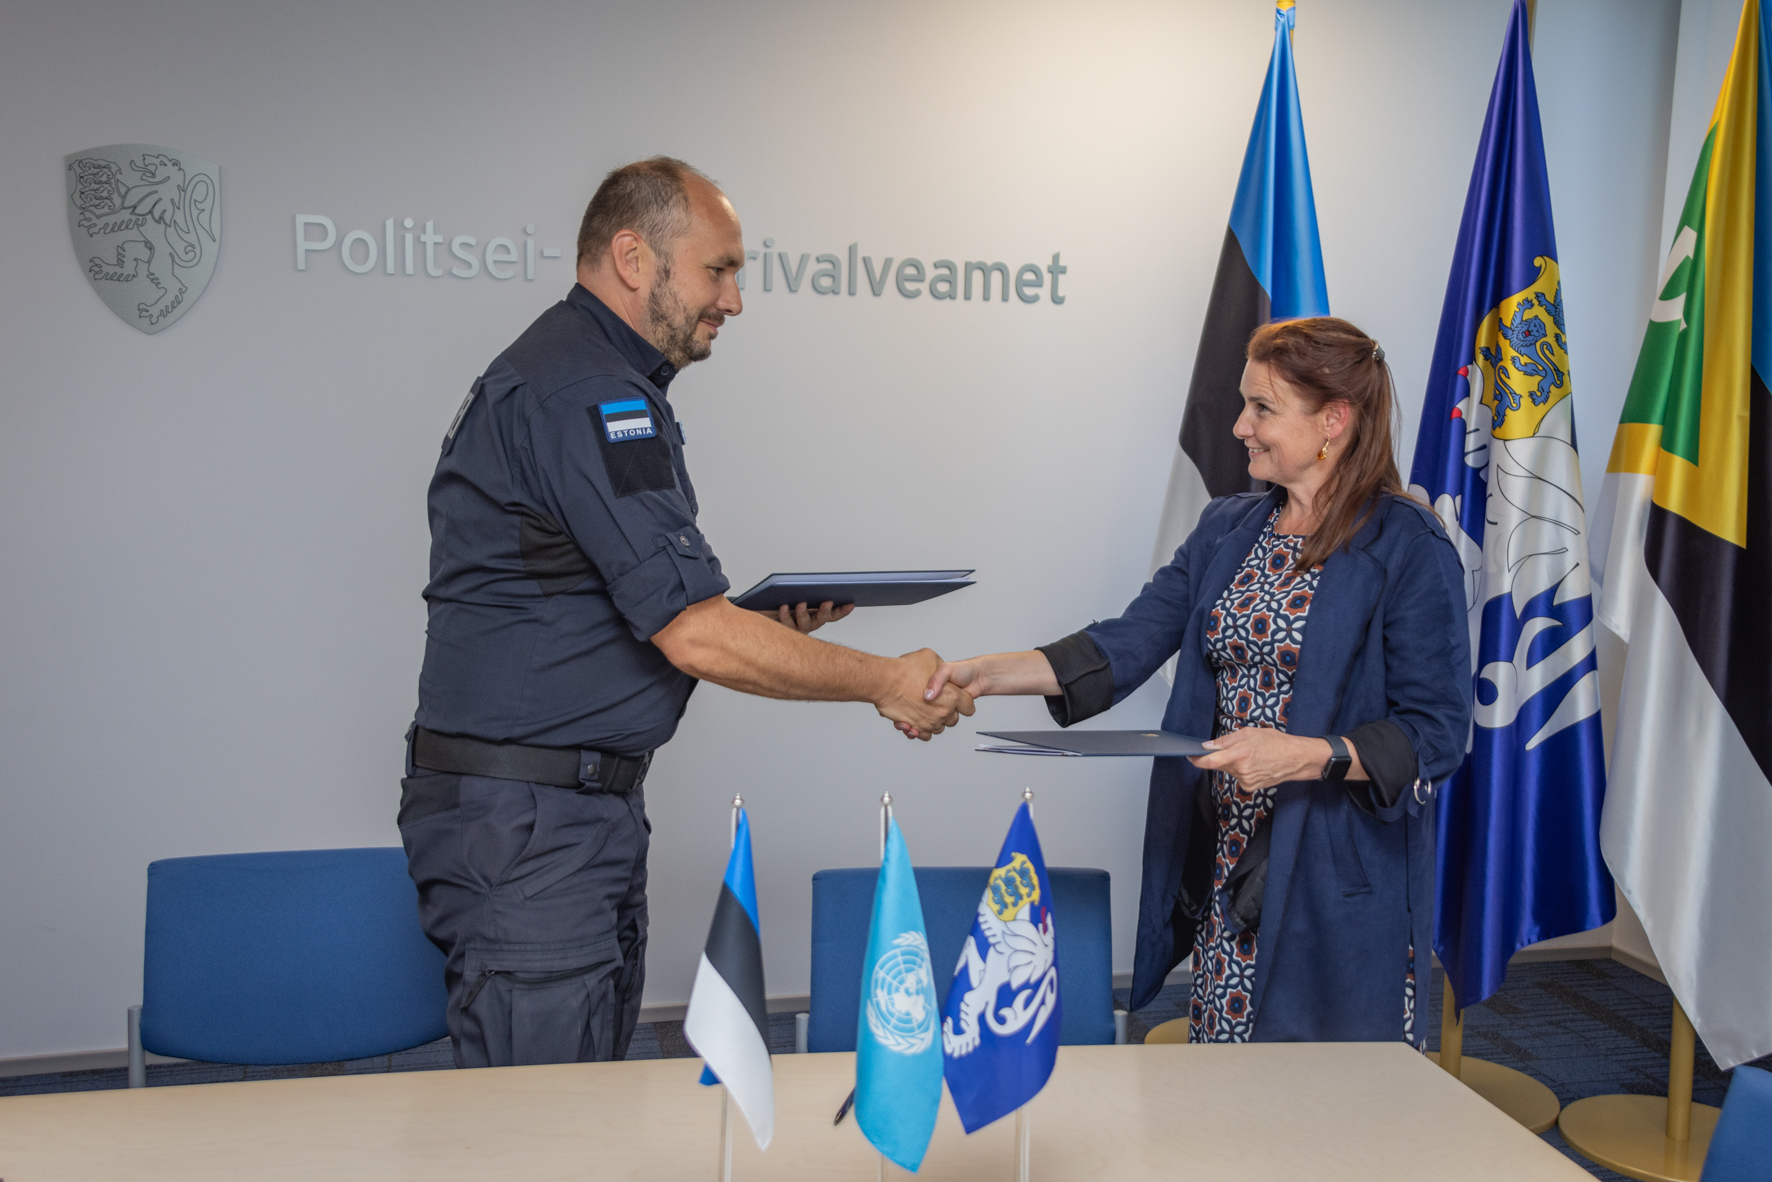 Guard refugees Police Border working – to Northern Estonian Europe and UNHCR with UNHCR Board help